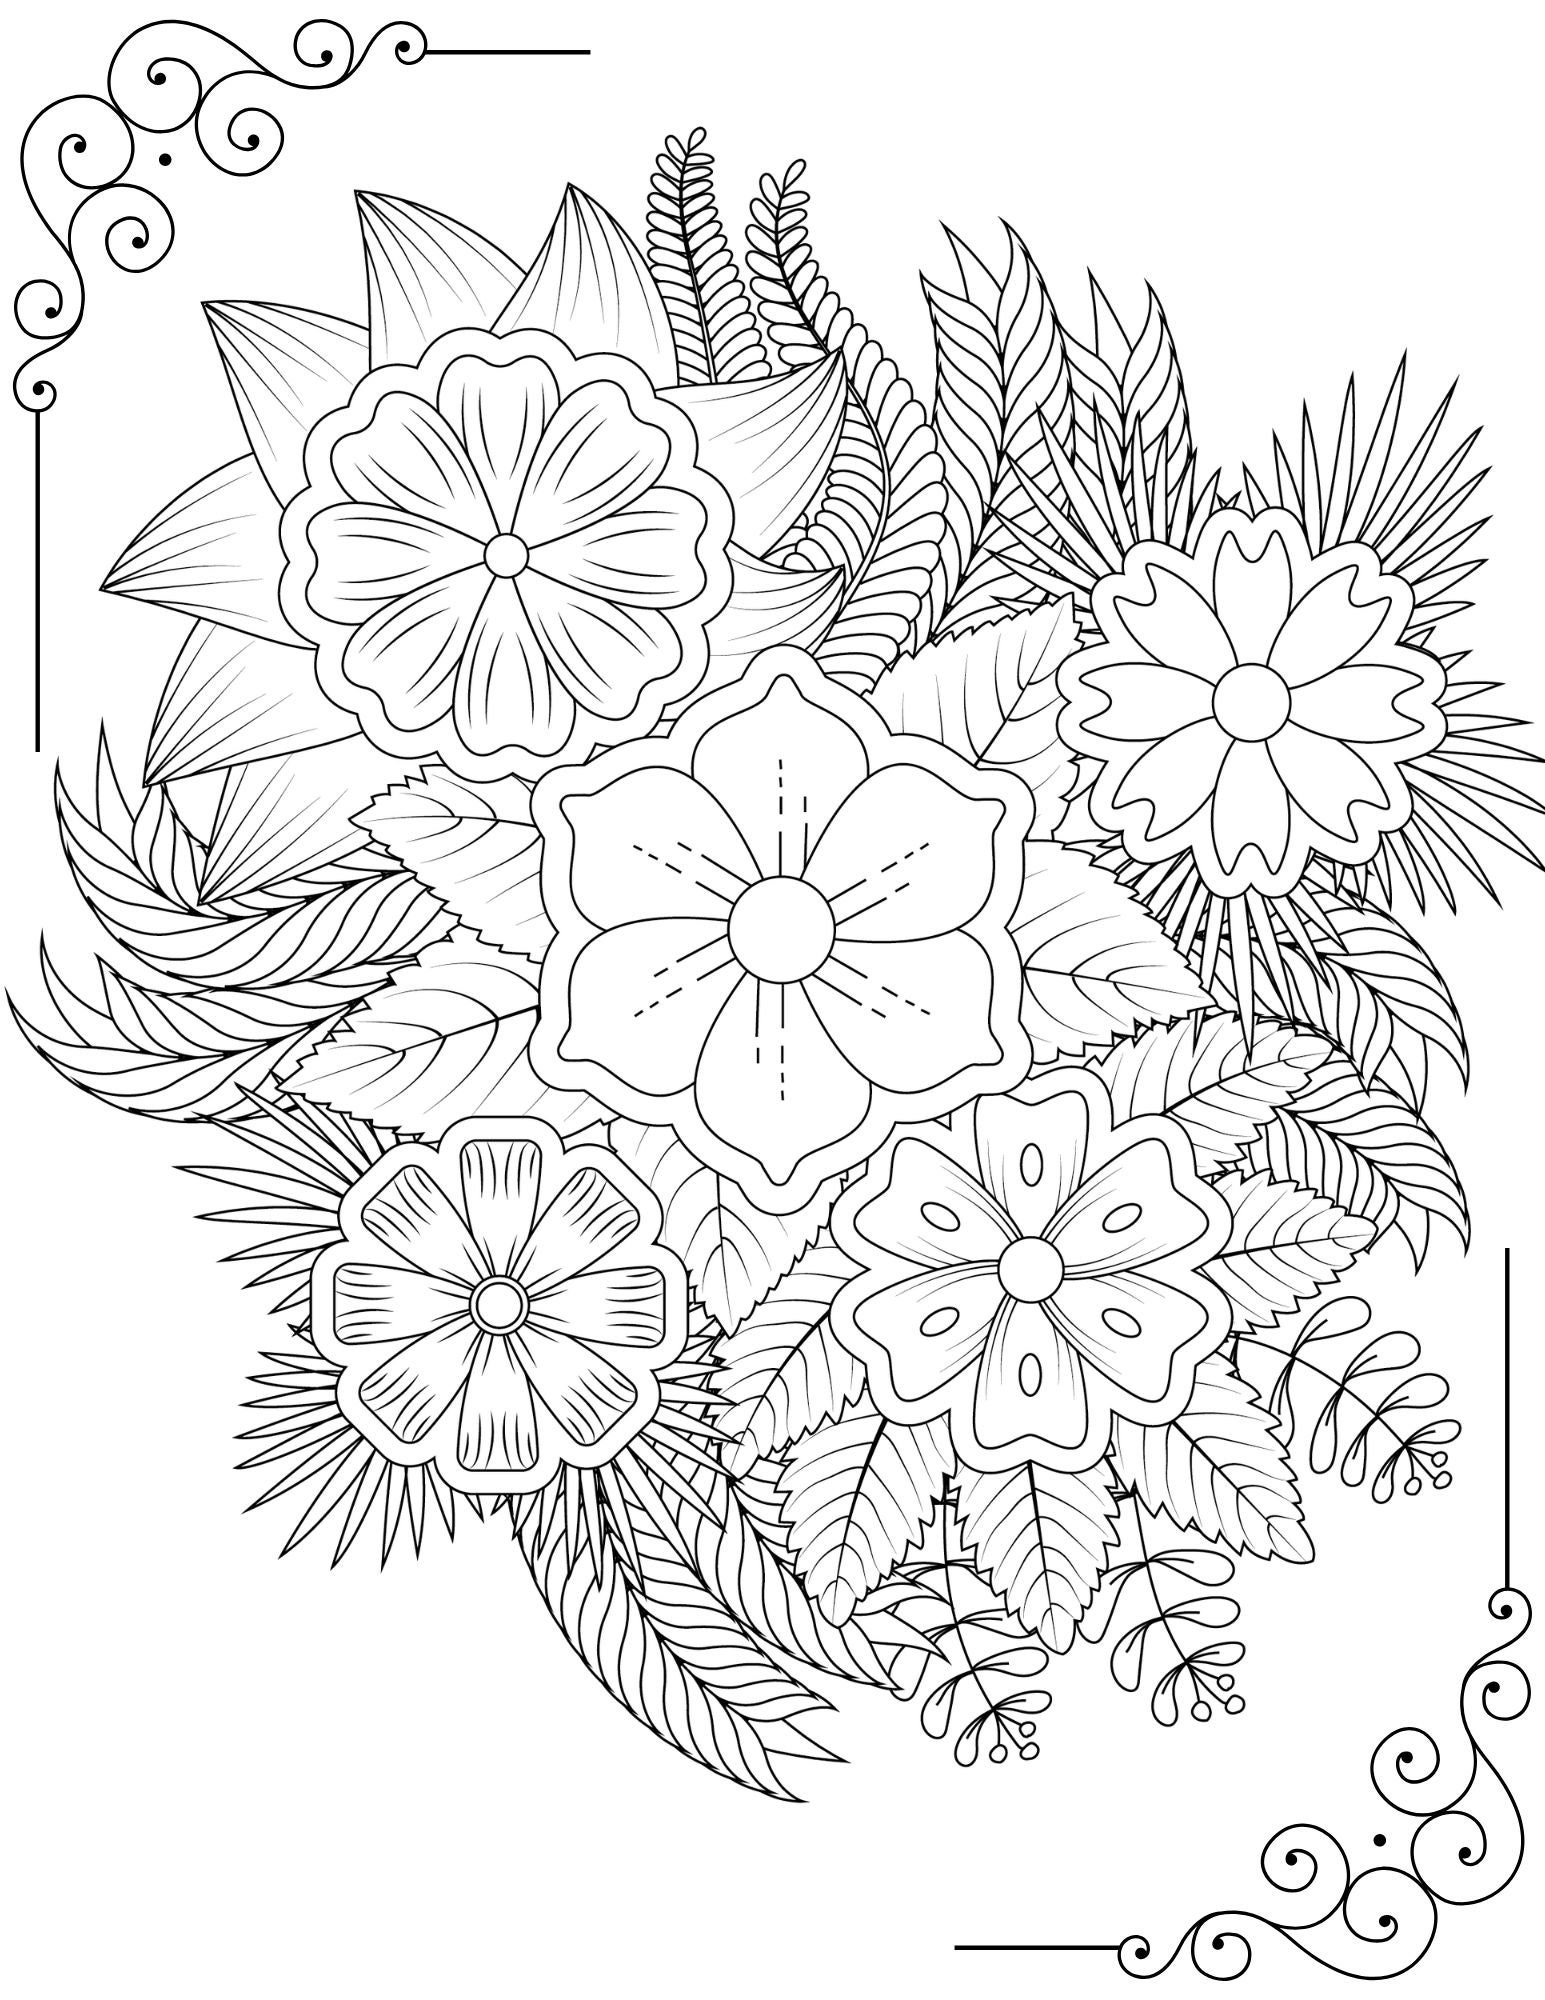 Ink Tracing Flowers: Vintage Explorer's Flower Coloring Book - Follow the  White Lines to Reveal Exotic Botanical Flowers. A Fresh and New Concept   for Stress Relief, Ideal for Adult Relaxation by